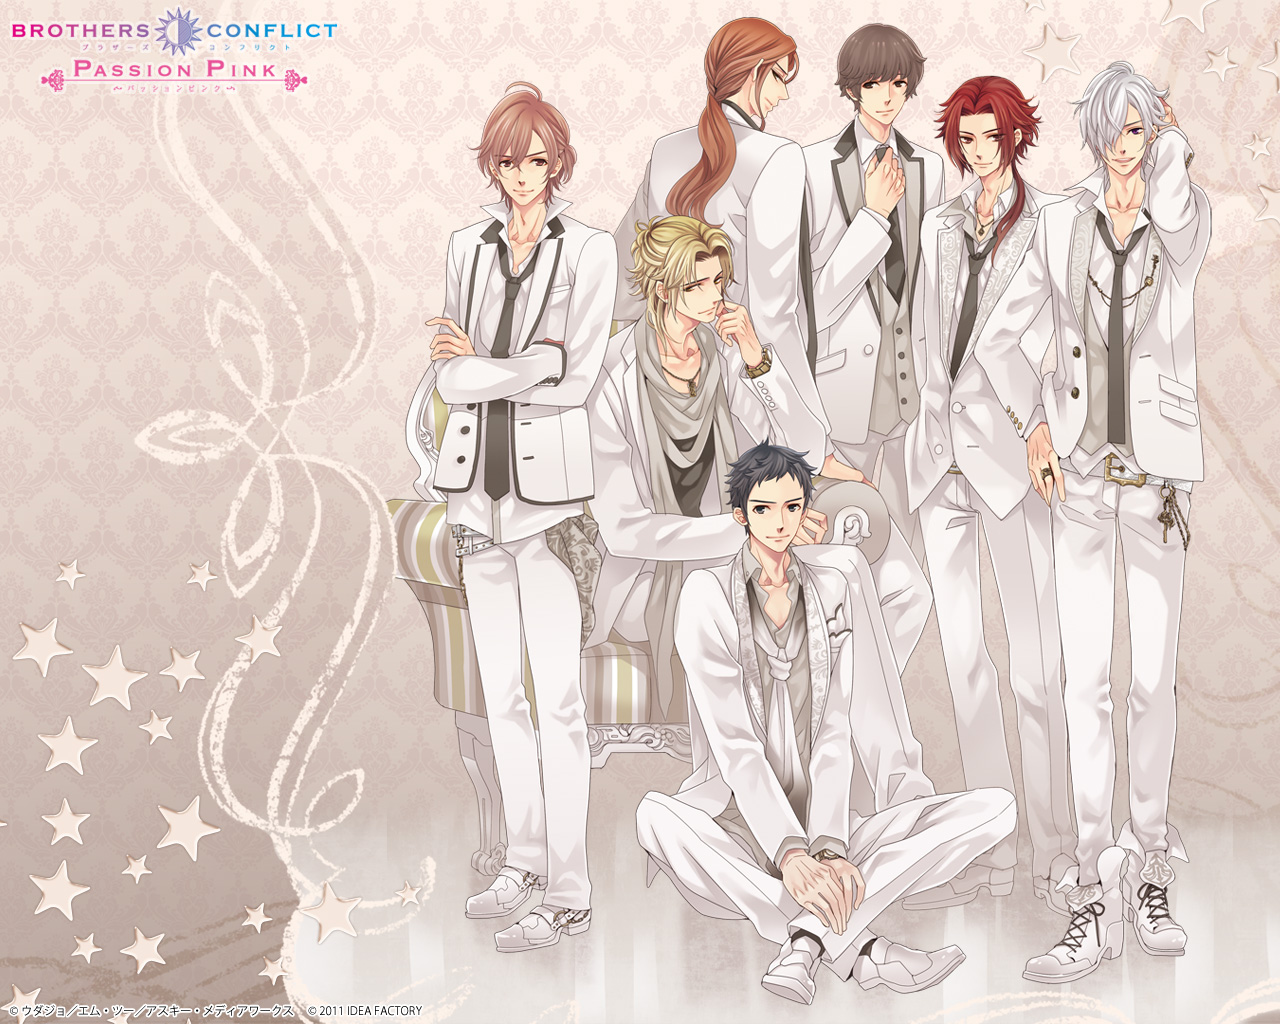 Brothers Conflict - Brothers Conflict Passion Pink Psp , HD Wallpaper & Backgrounds